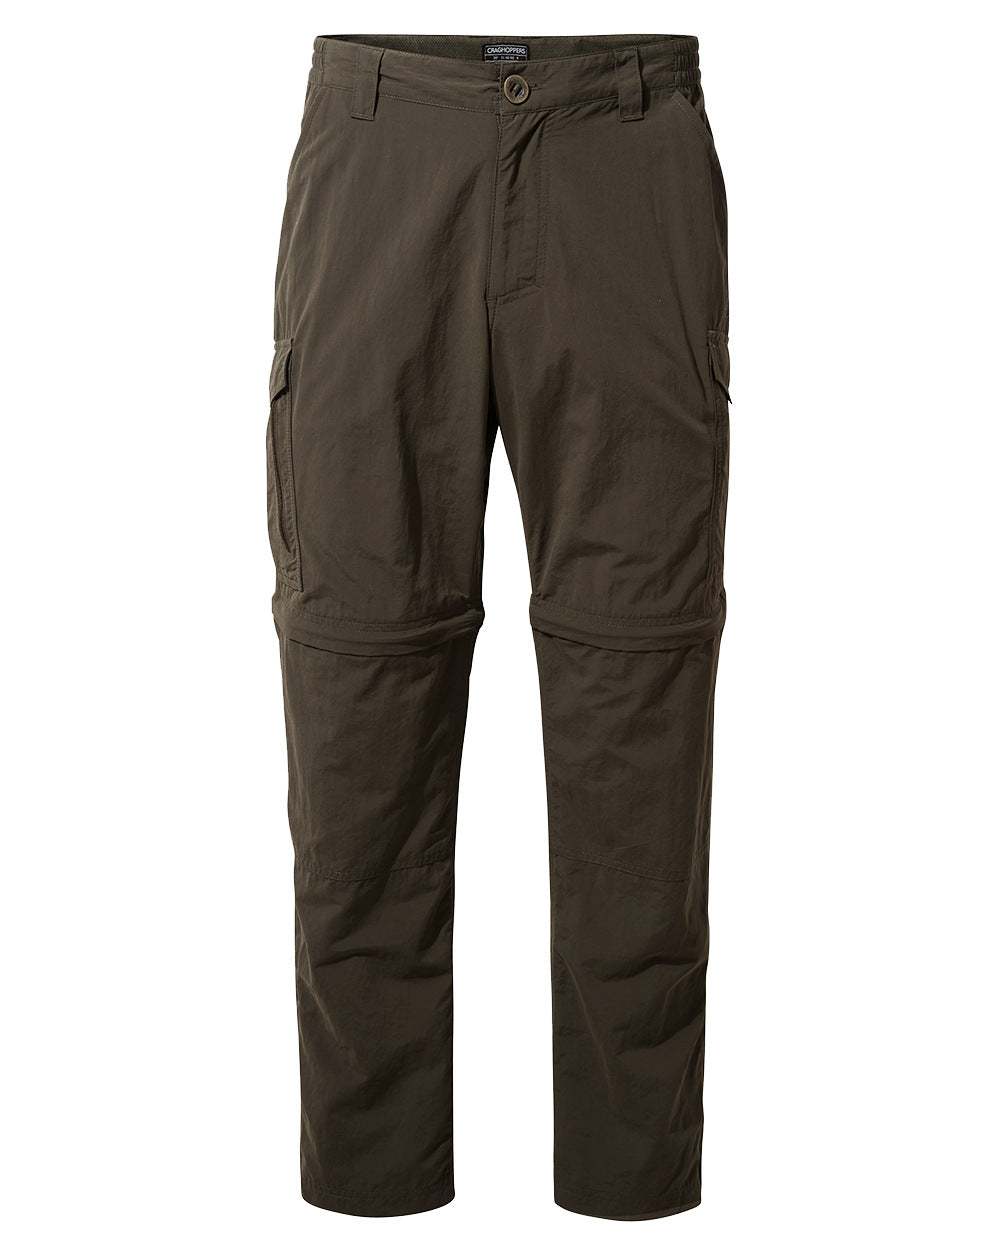 Woodland Green Coloured Craghoppers Mens NosiLife Convertible II Trousers On A White Background 